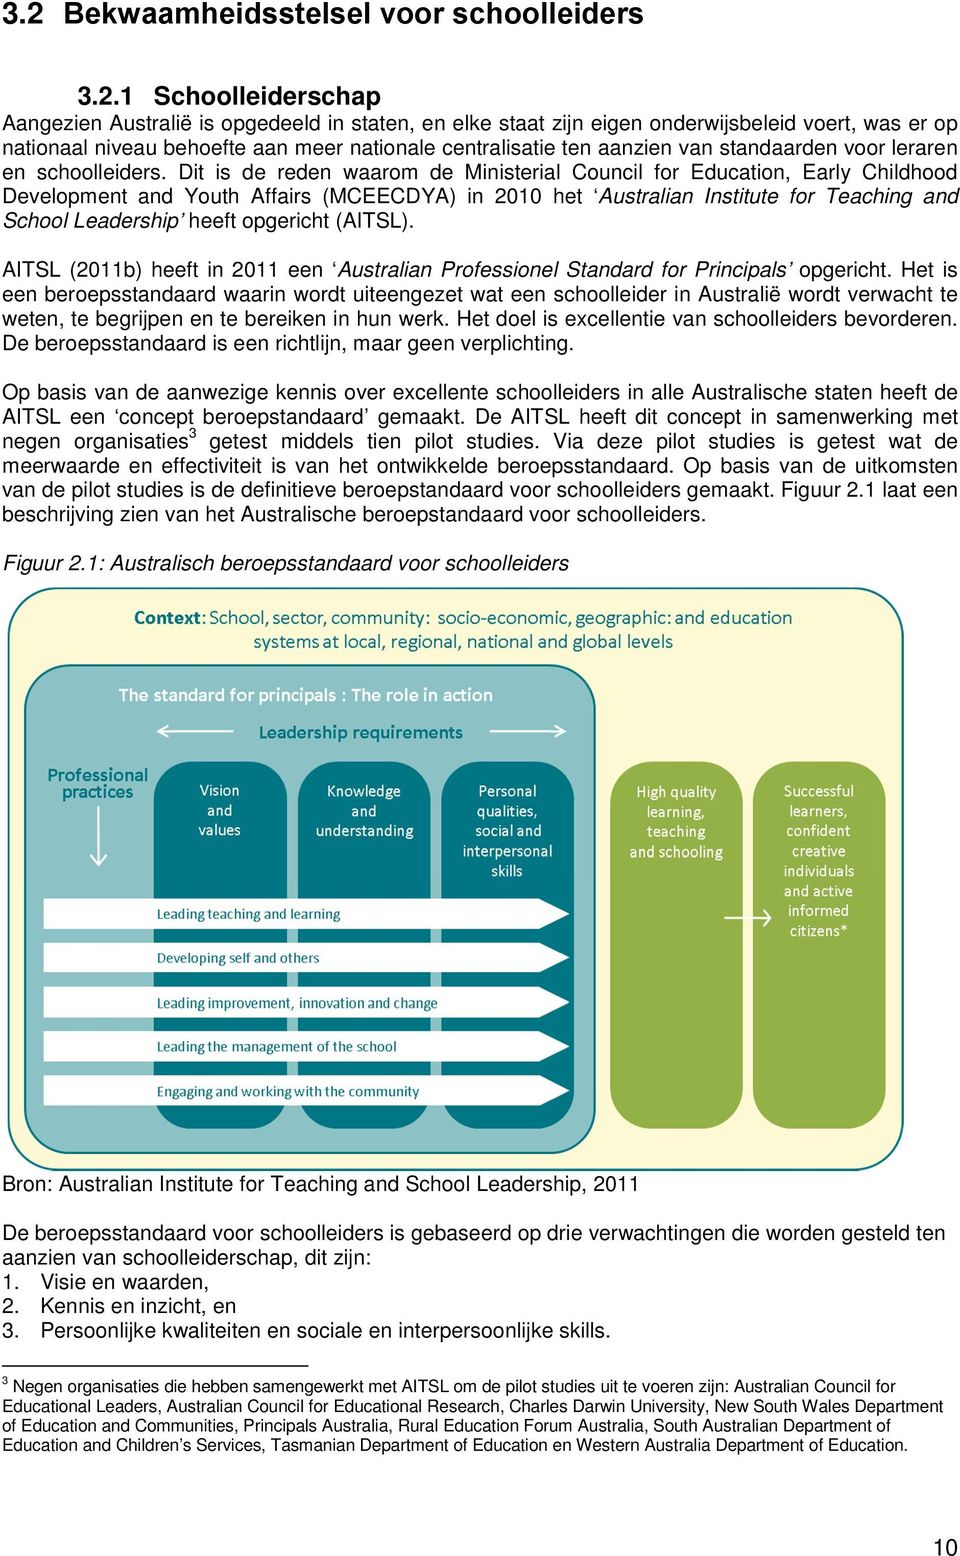 Dit is de reden waarom de Ministerial Council for Education, Early Childhood Development and Youth Affairs (MCEECDYA) in 2010 het Australian Institute for Teaching and School Leadership heeft